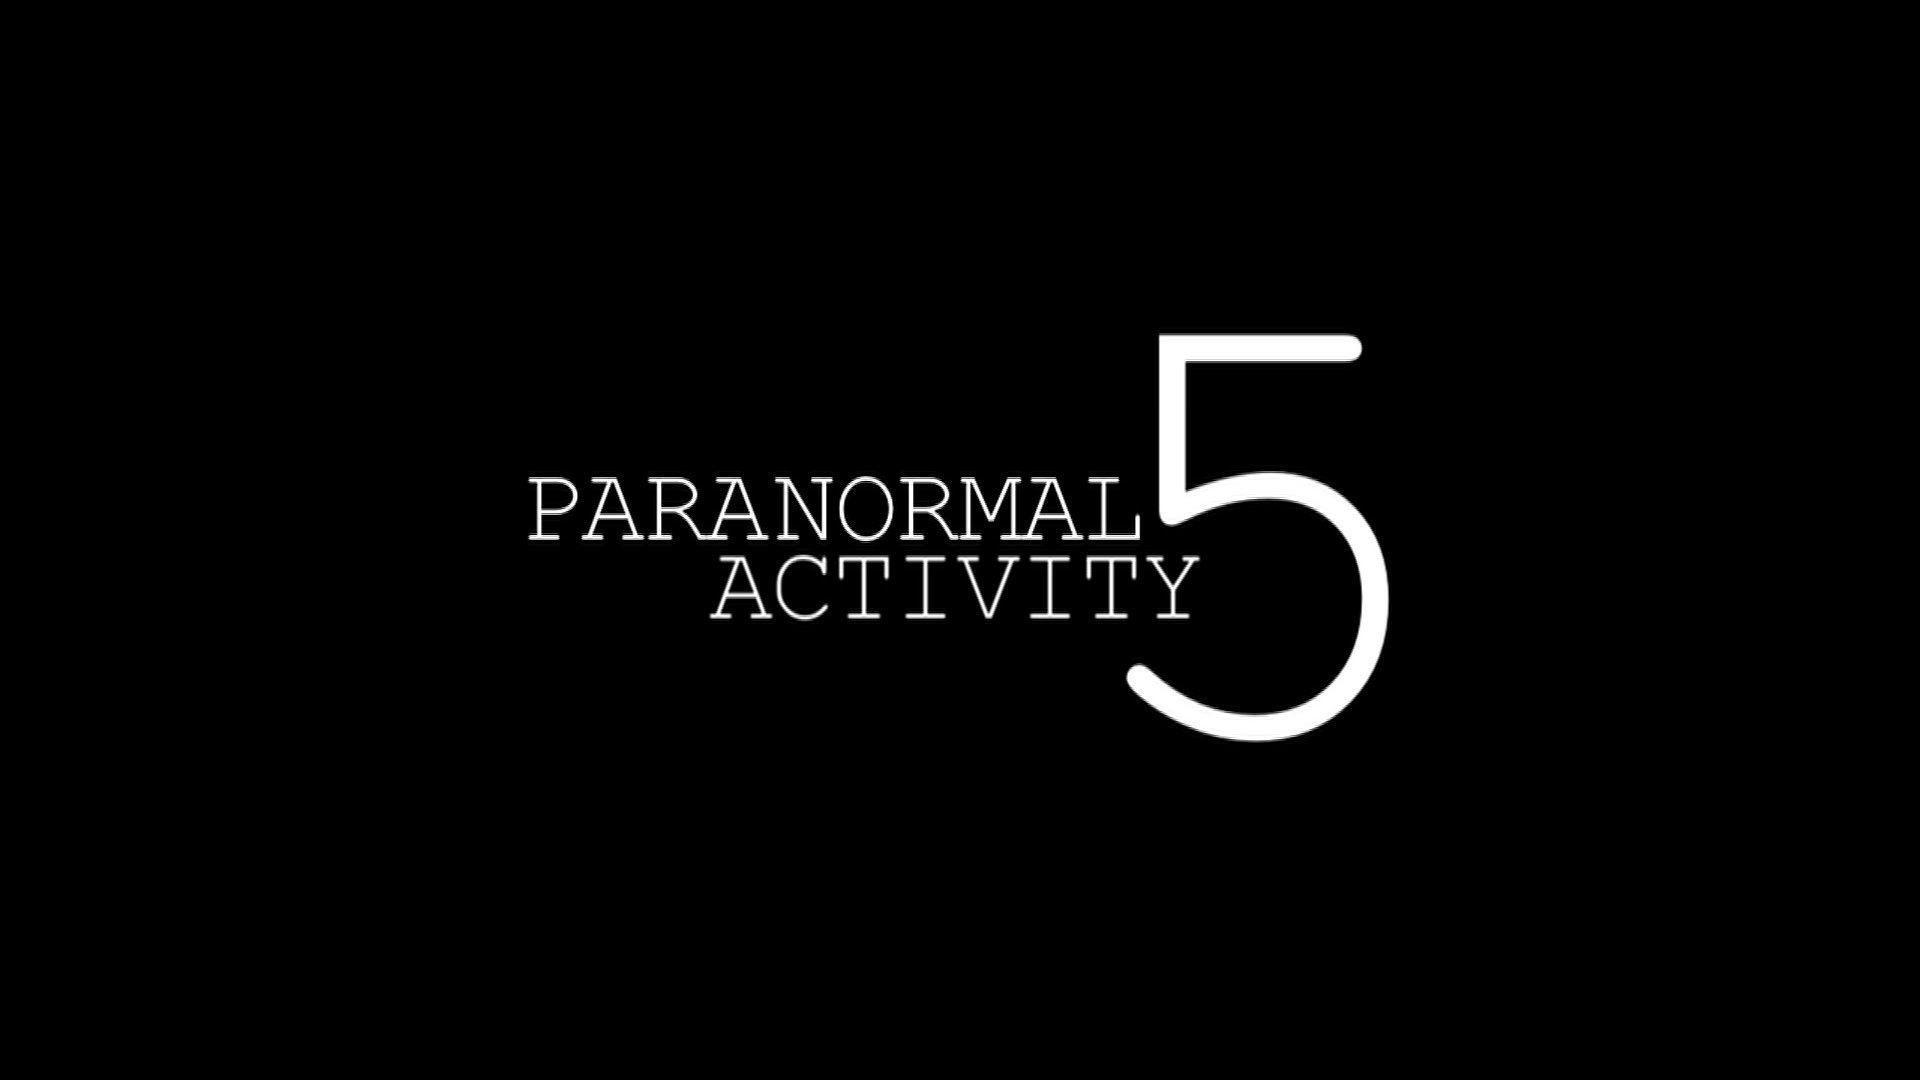 The film Paranormal Activity 5 wallpaper and image